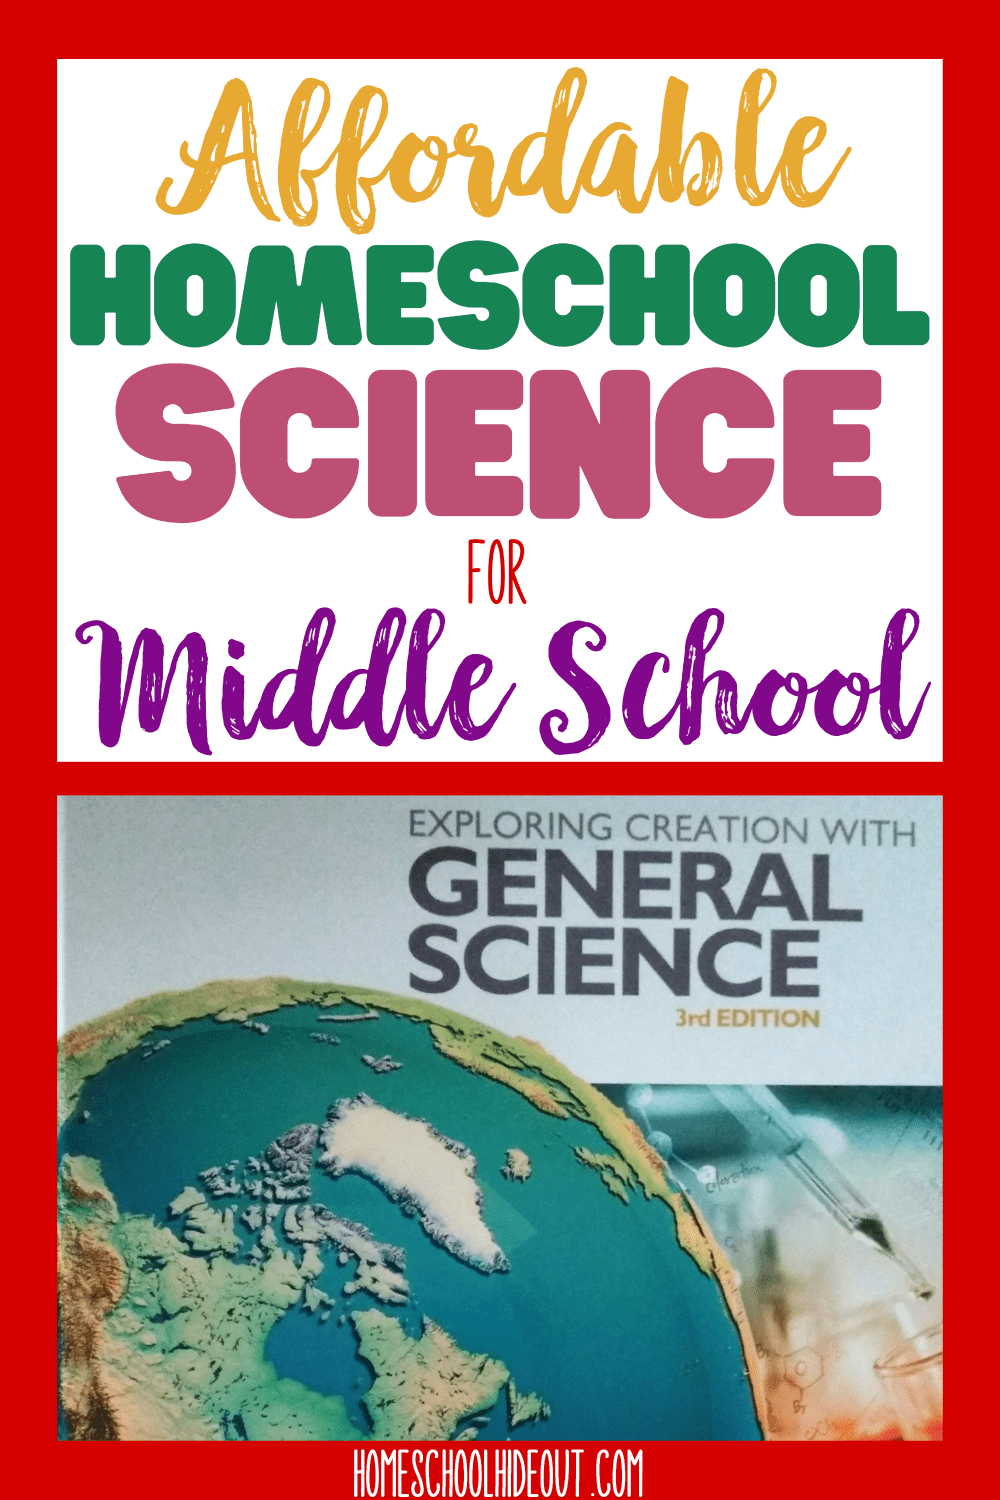 Homeschool science for middle school doesn't have to be a chore! This general science from Apologia has my kiddos excited to learn! #homeschoolers #homeschool #homeschoolingscience #apologia